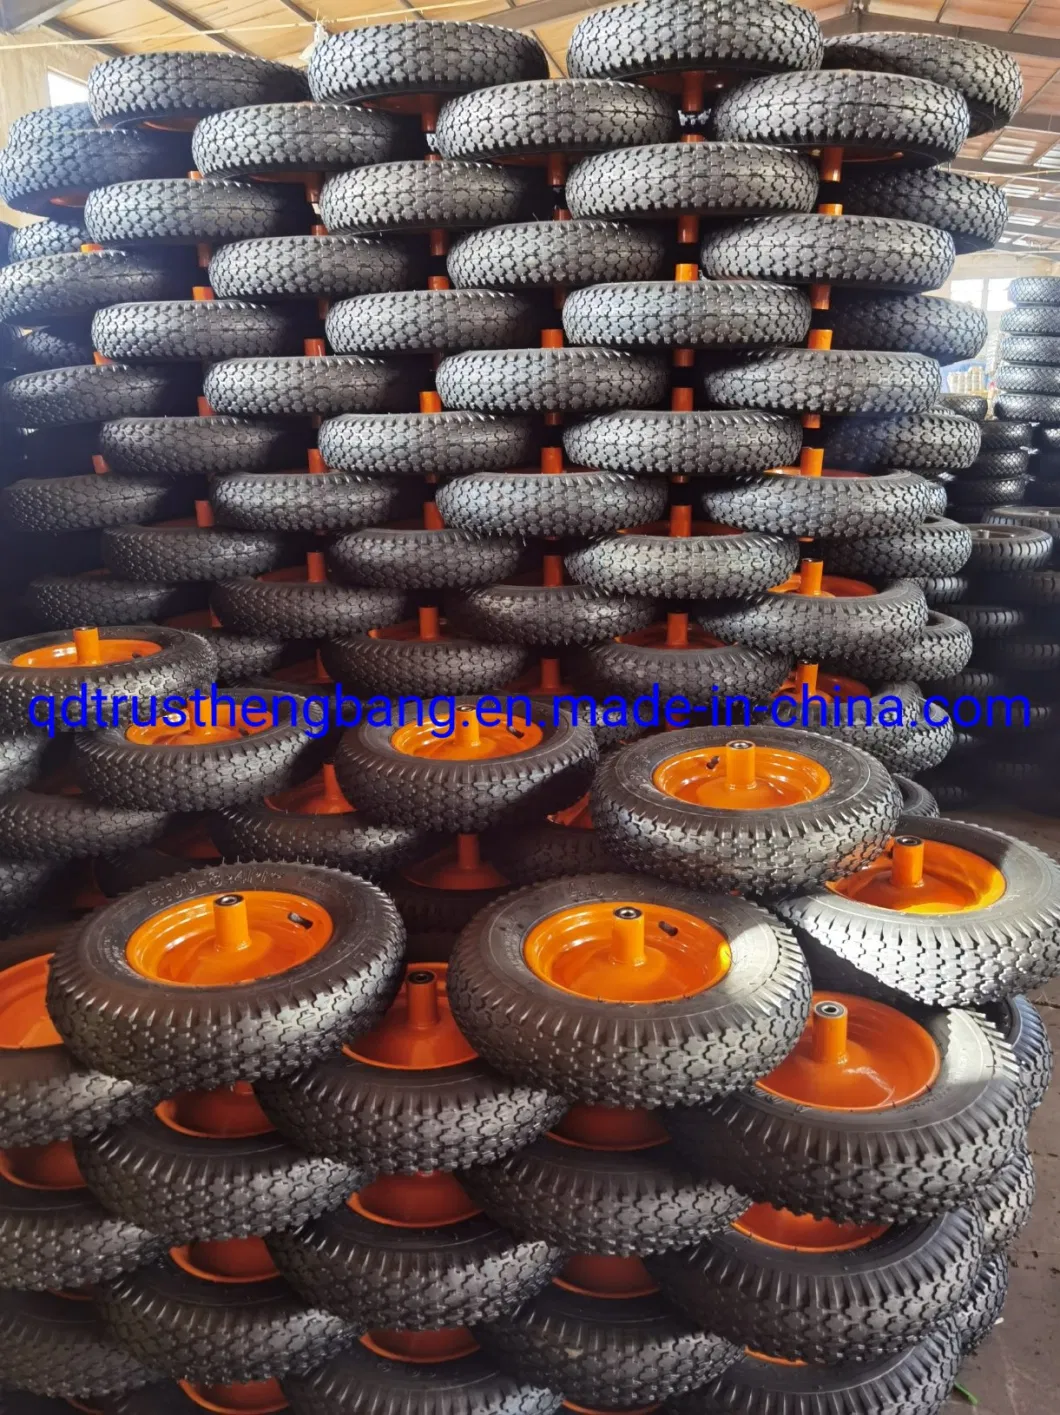 8 Inch 2.50-4 Pneumatic Inflatable Rubber Cover Tire for or Hand Truck Garden Steel Utility Wagon Trailer Trolley Cart